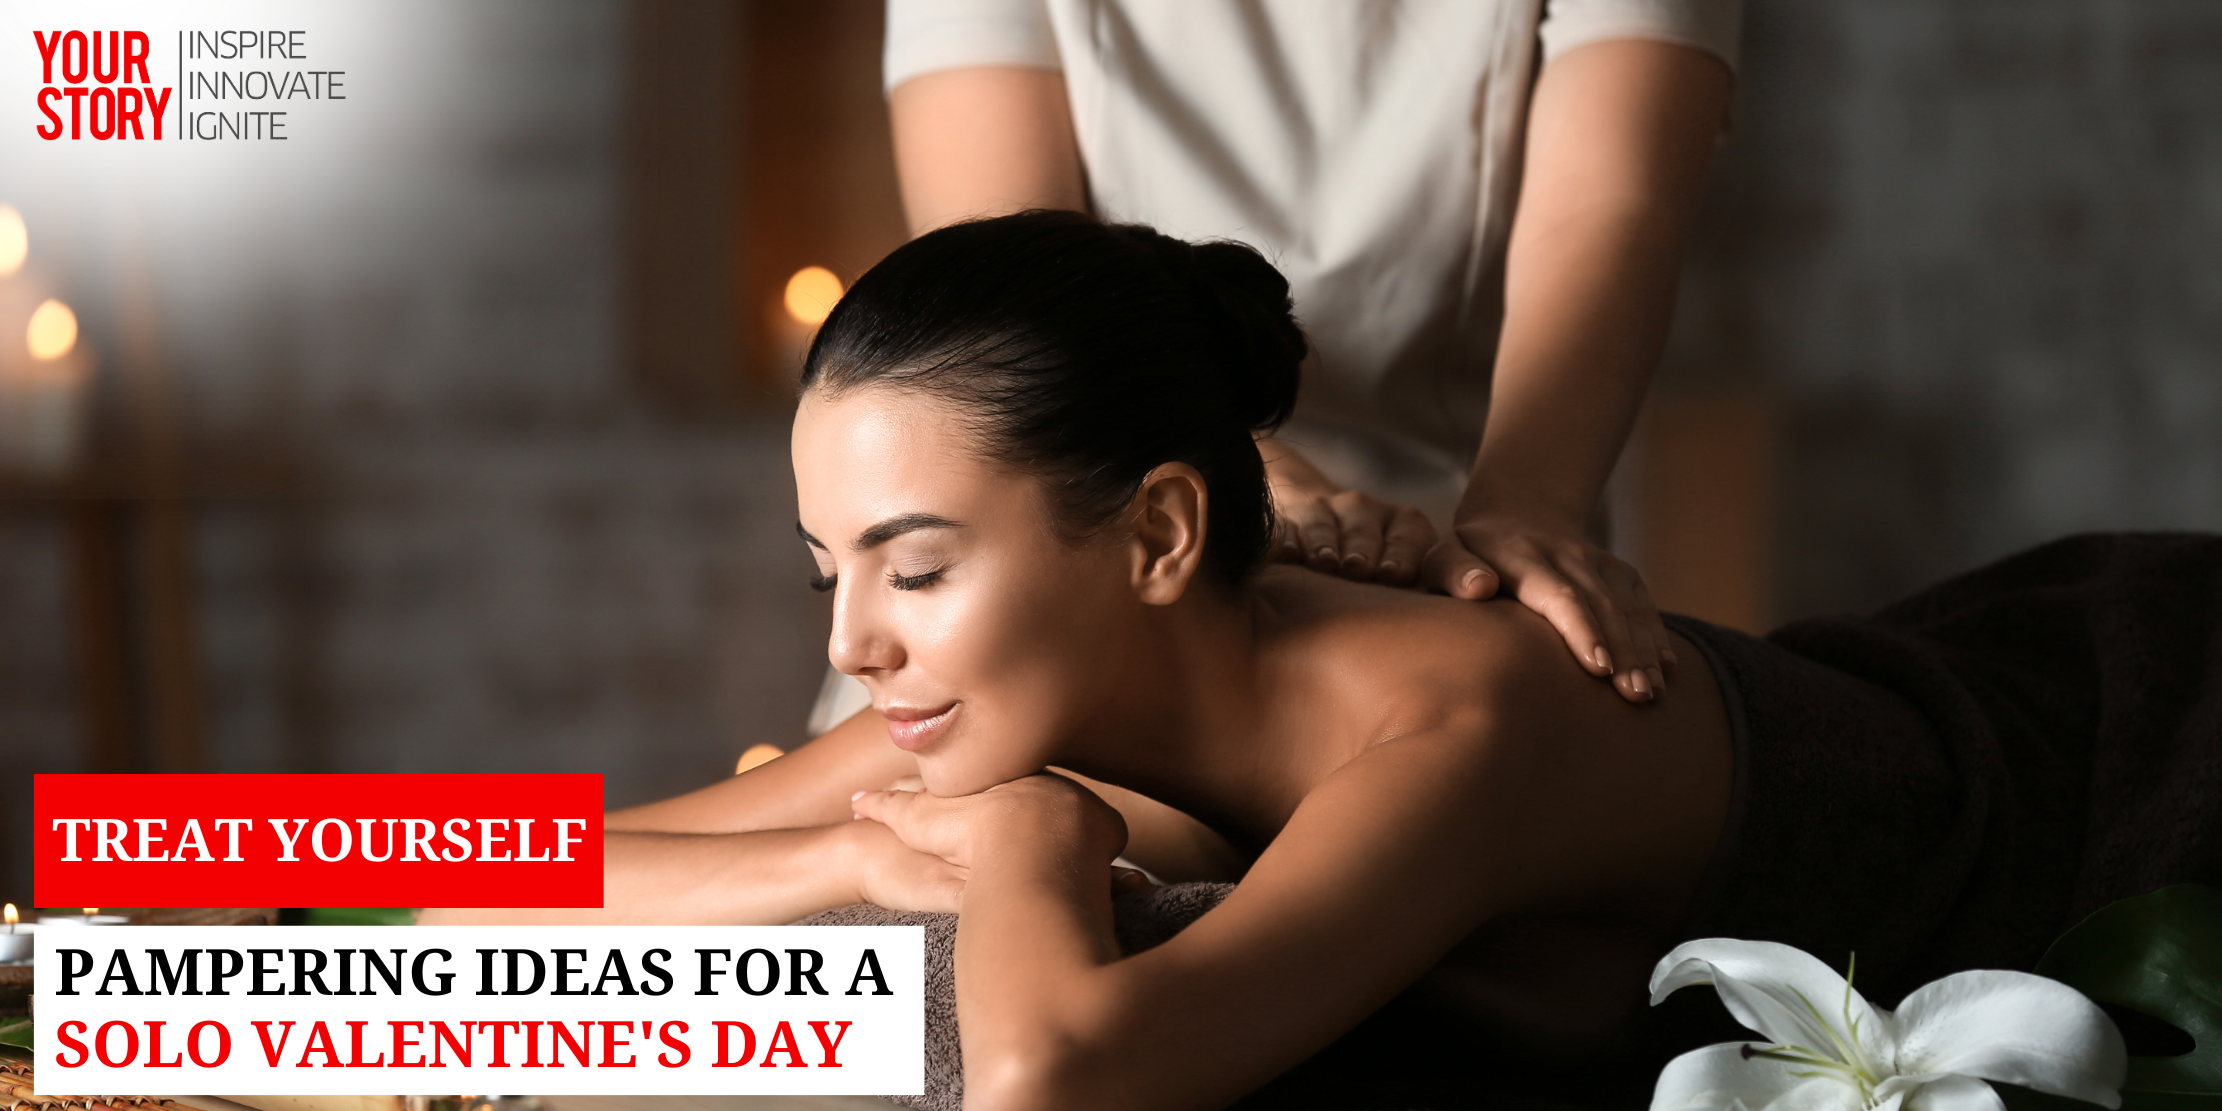 ⁠⁠Treat Yourself: Pampering Ideas for a Solo Valentine's Day